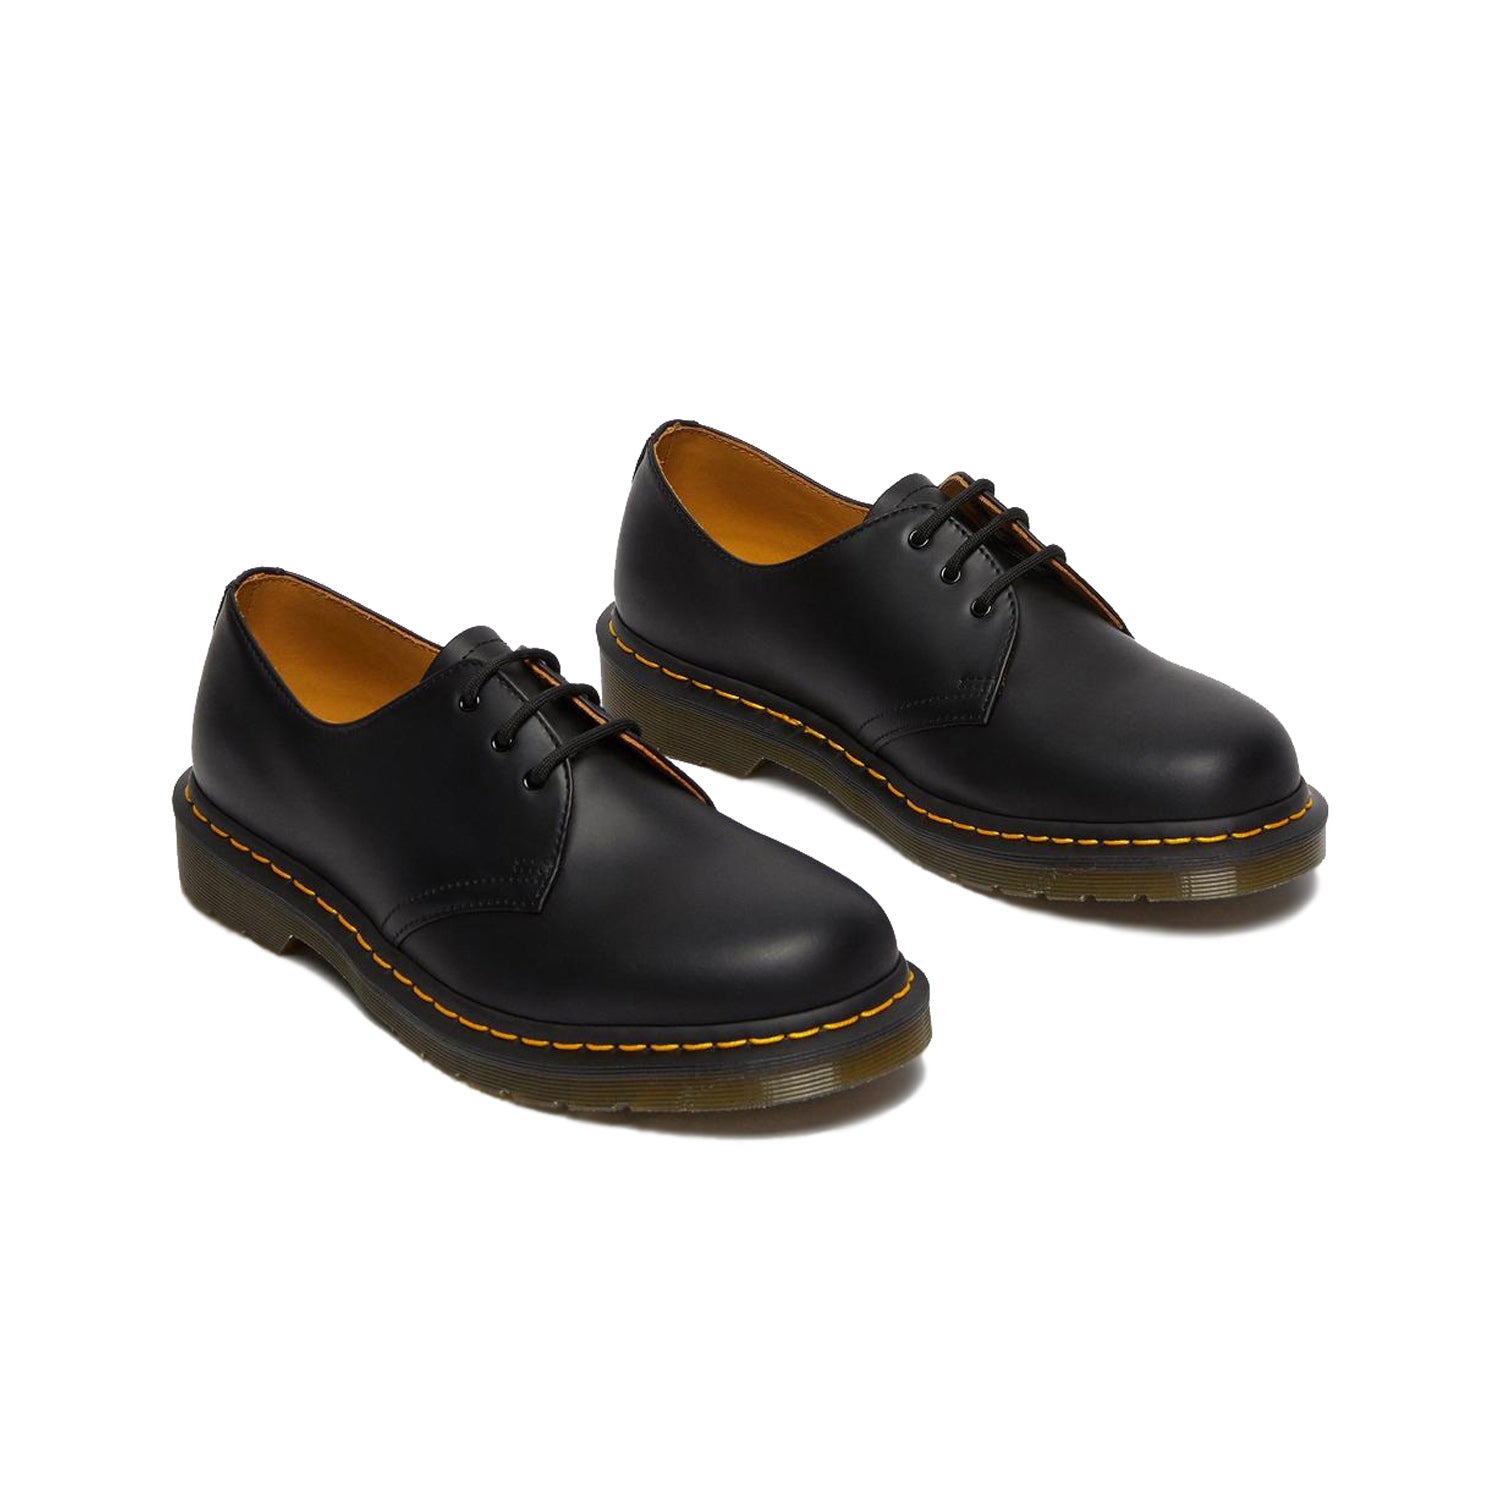 Dr. Martens 1461 Smooth Leather Shoes Black